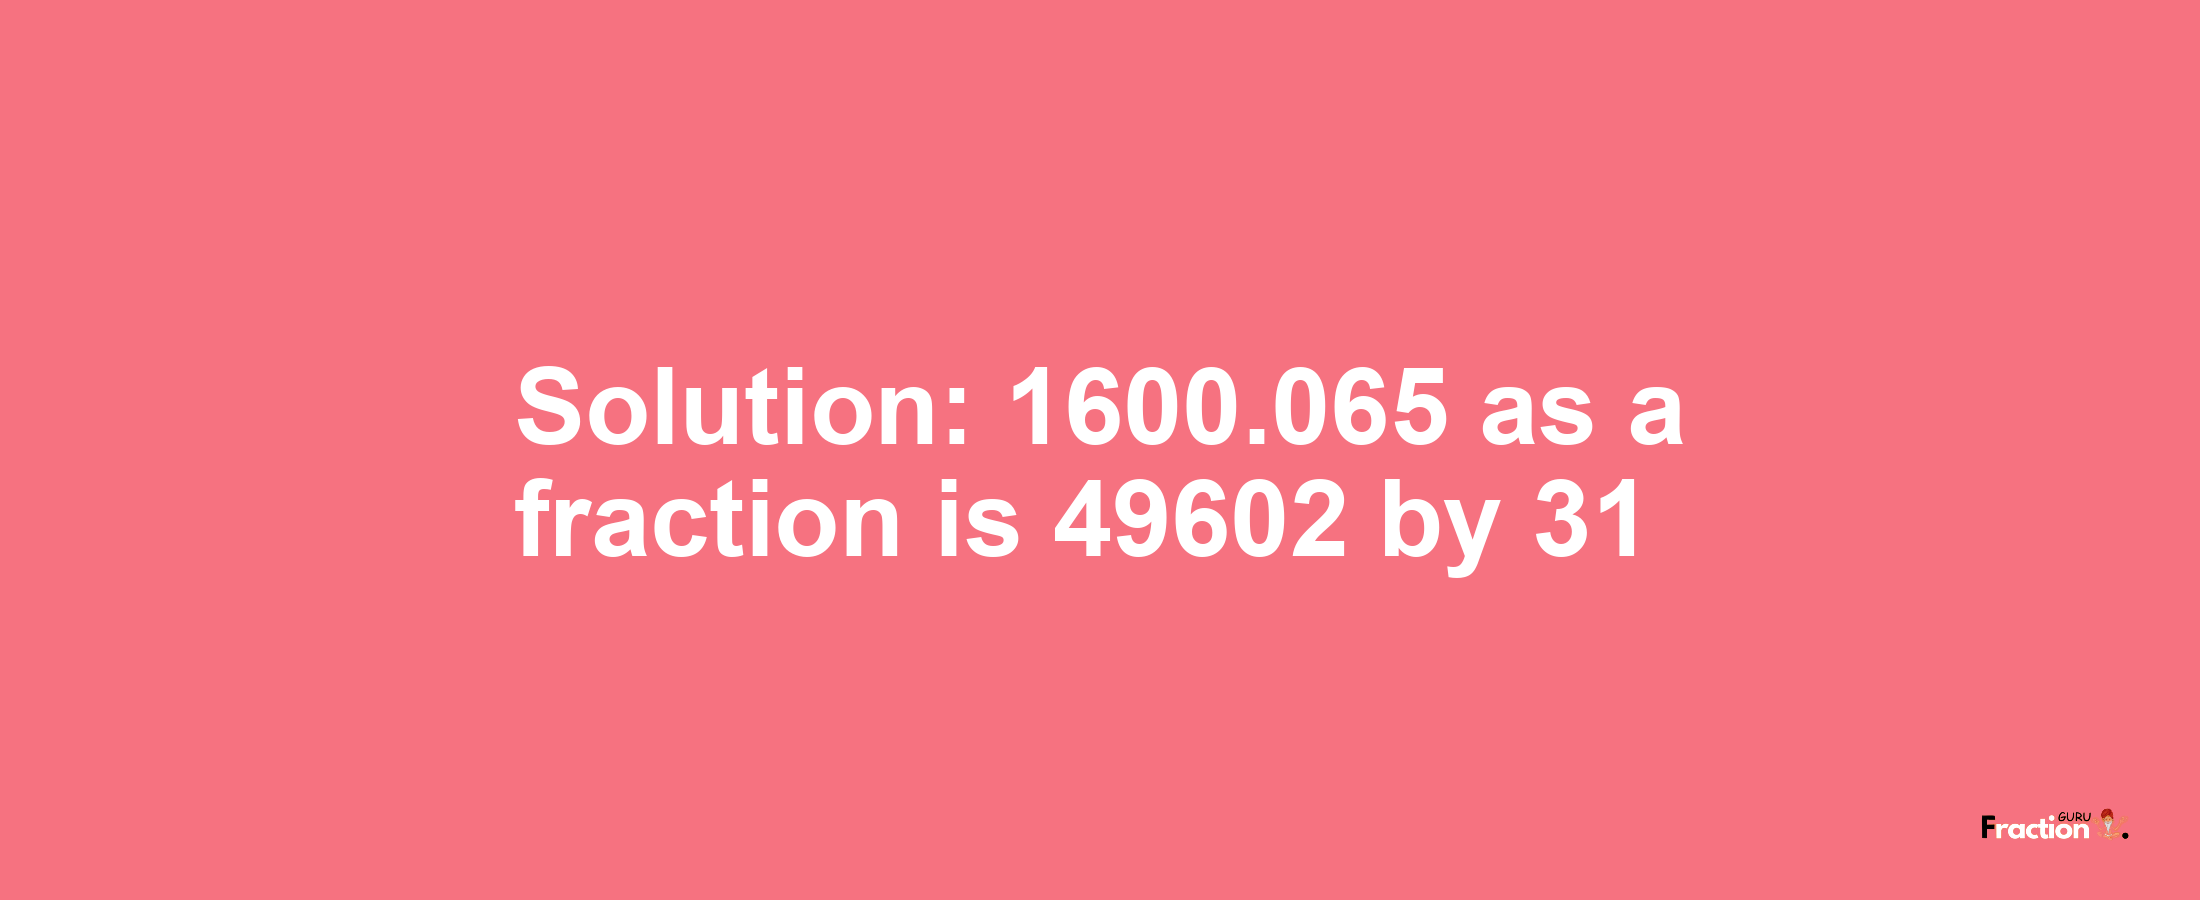 Solution:1600.065 as a fraction is 49602/31